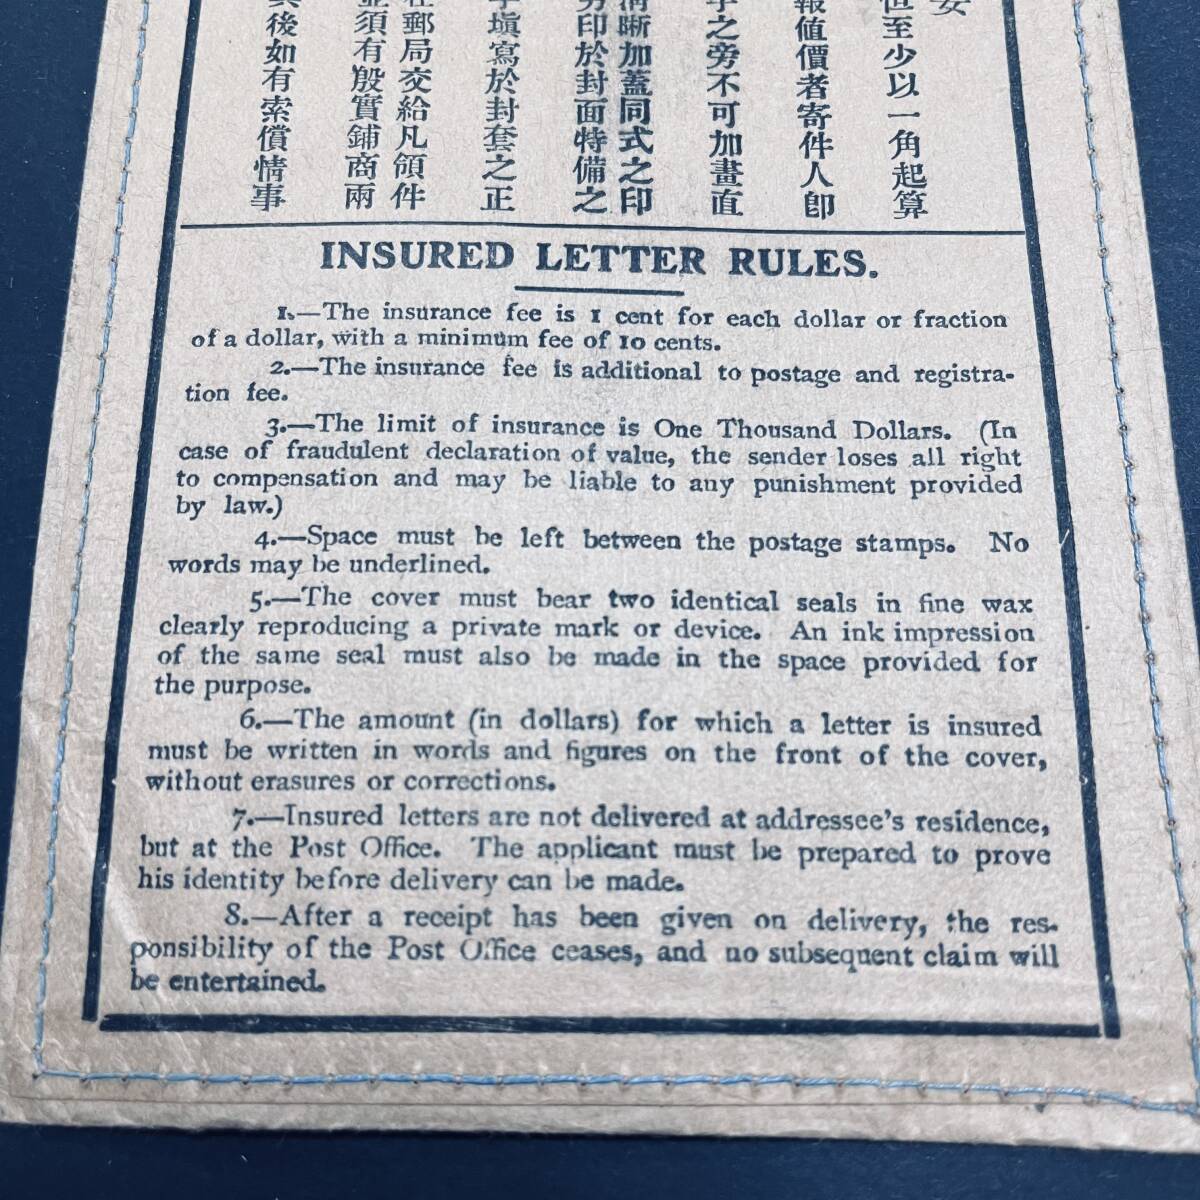 1930 period China guarantee attaching mail for envelope unused INSURED LETTER unused is see .. not two -ply envelope beautiful goods 